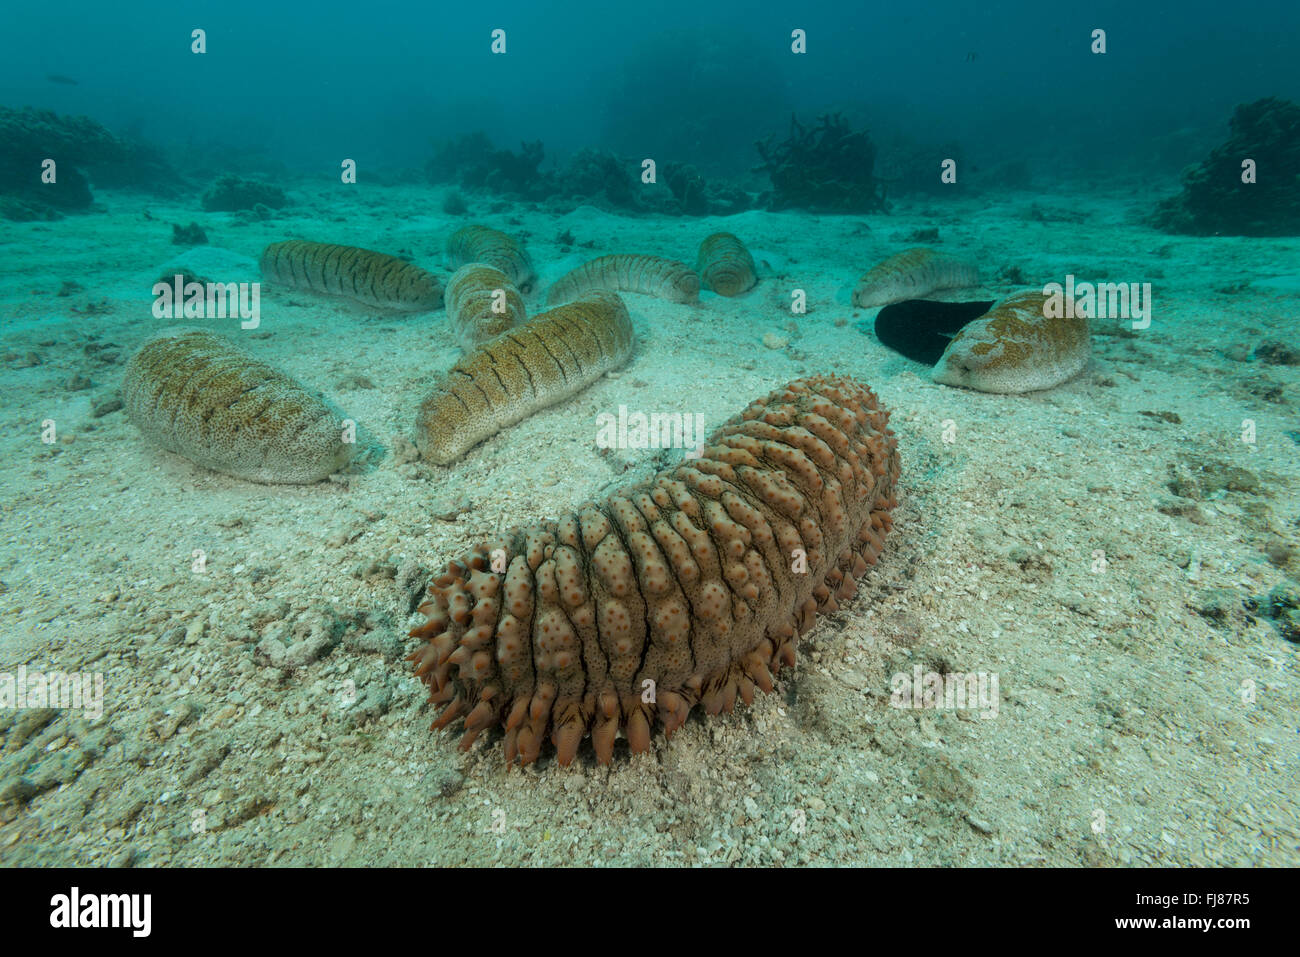 Collections of various sea cucumbers litter the sand eating the sand and digesting the nutrients. Stock Photo